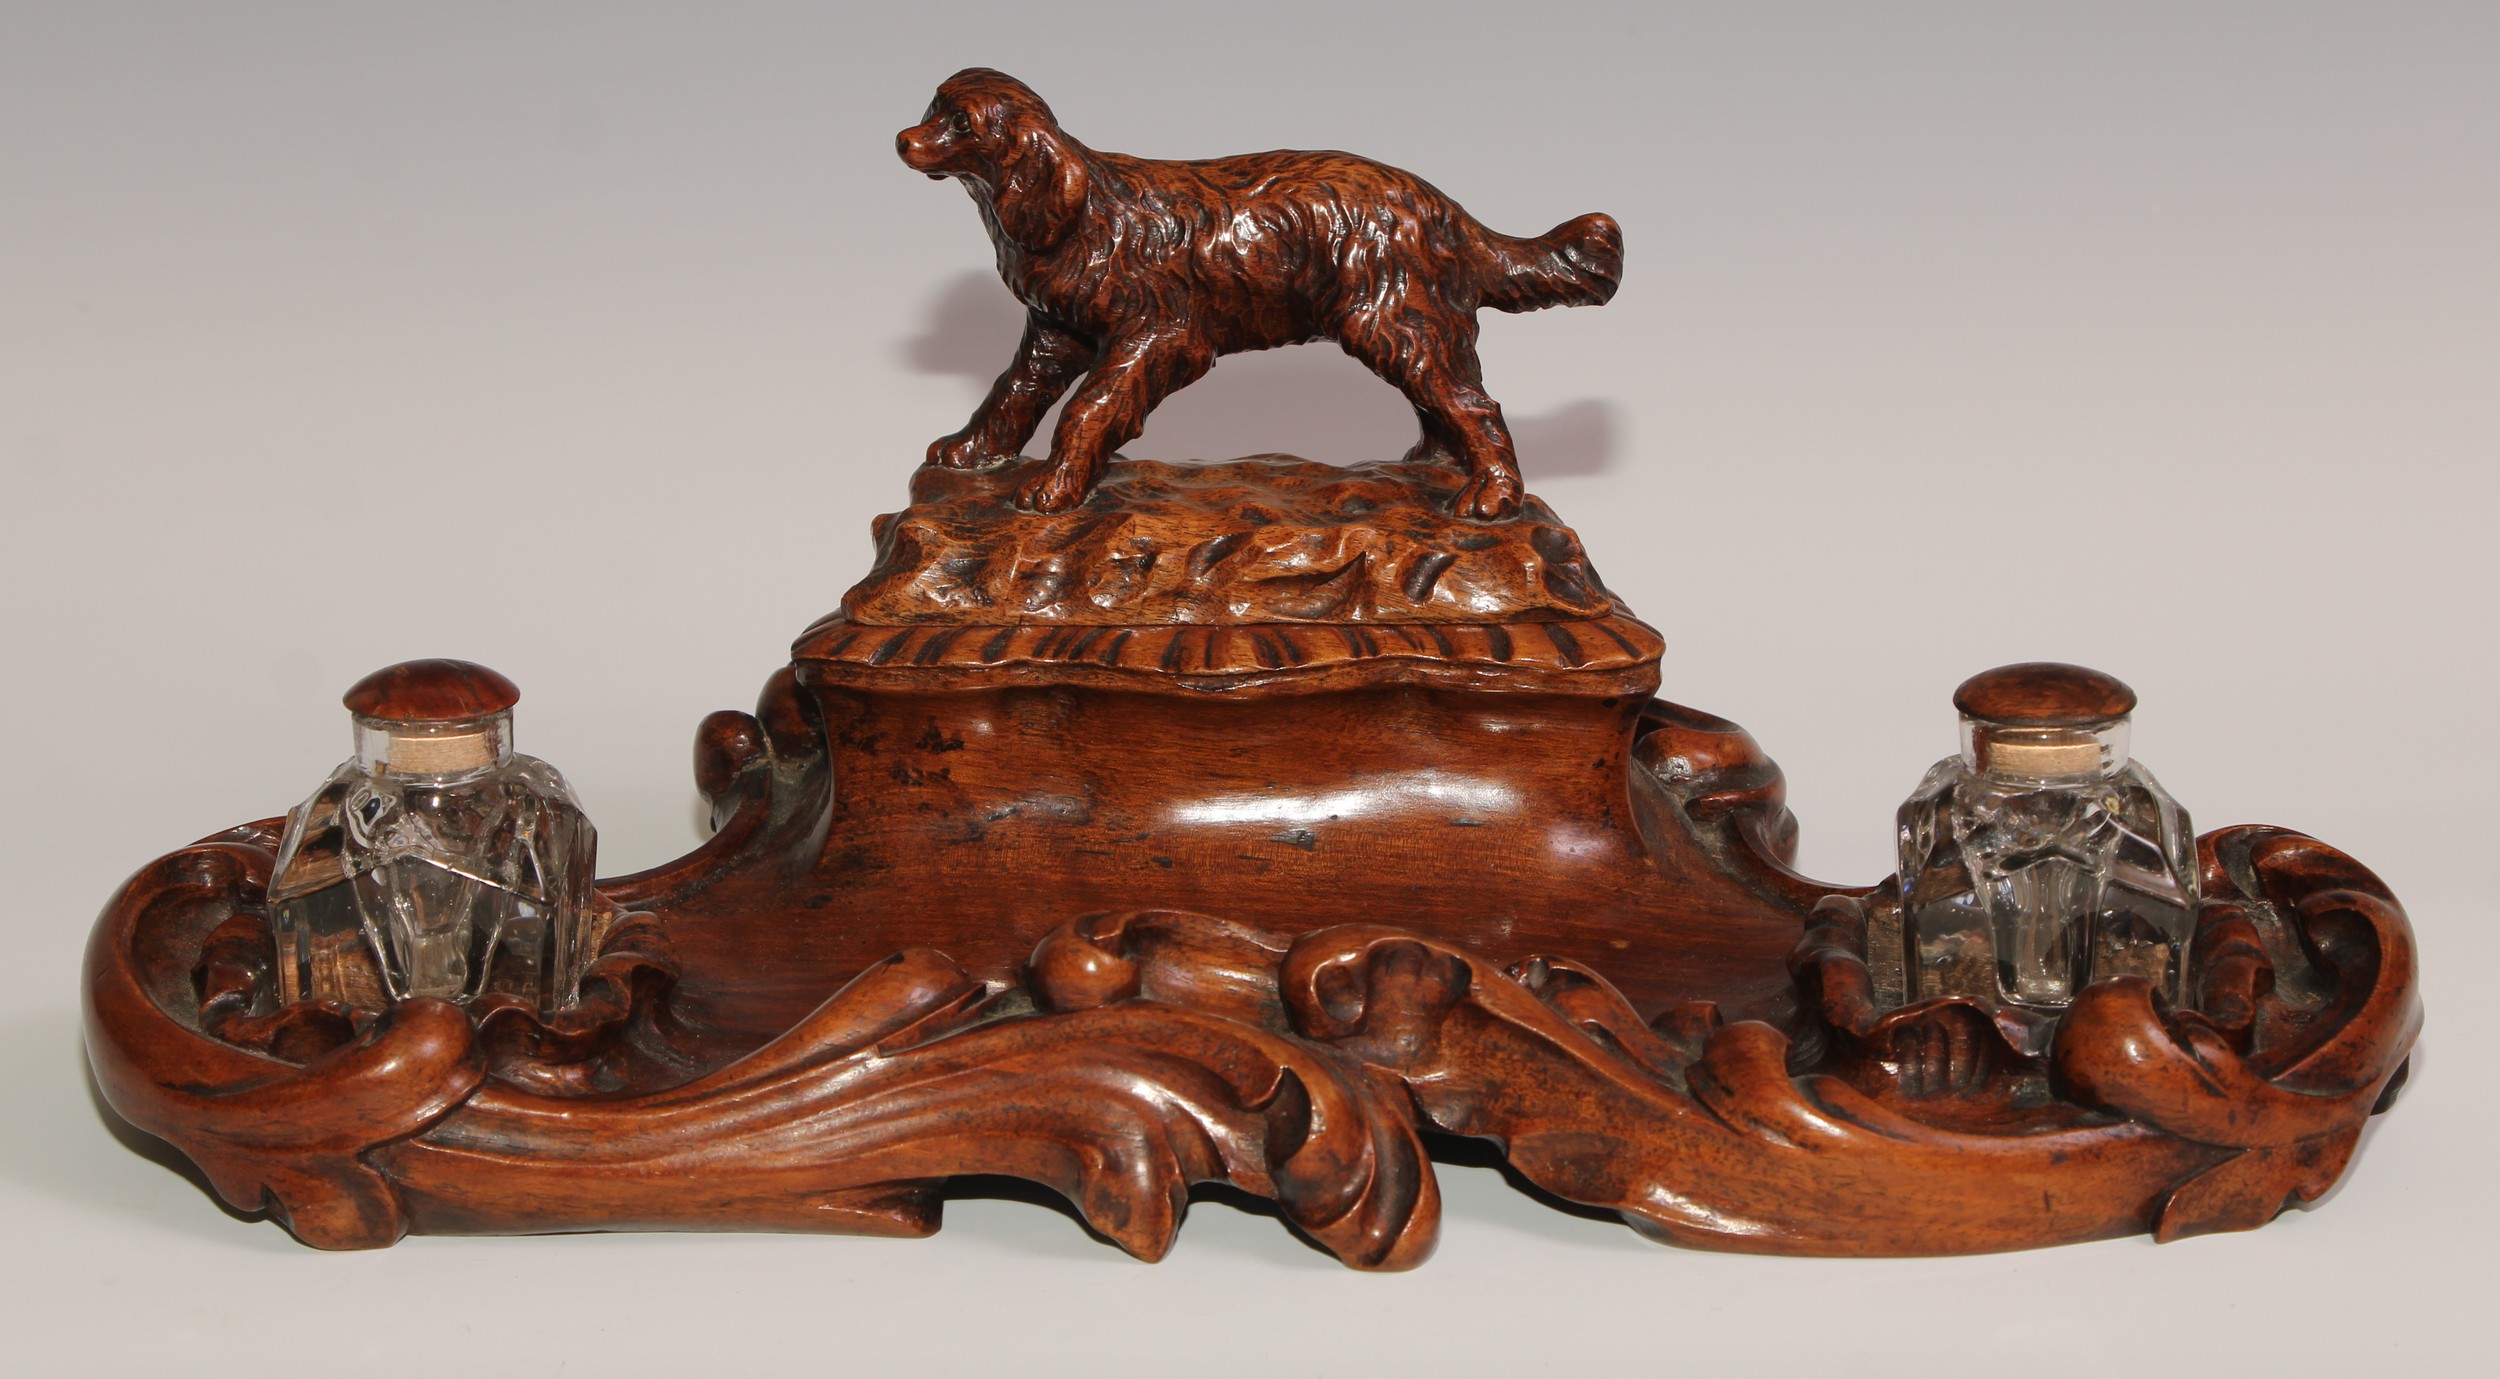 A 19th century walnut desk stand, carved in the Black Forest manner, the central compartment